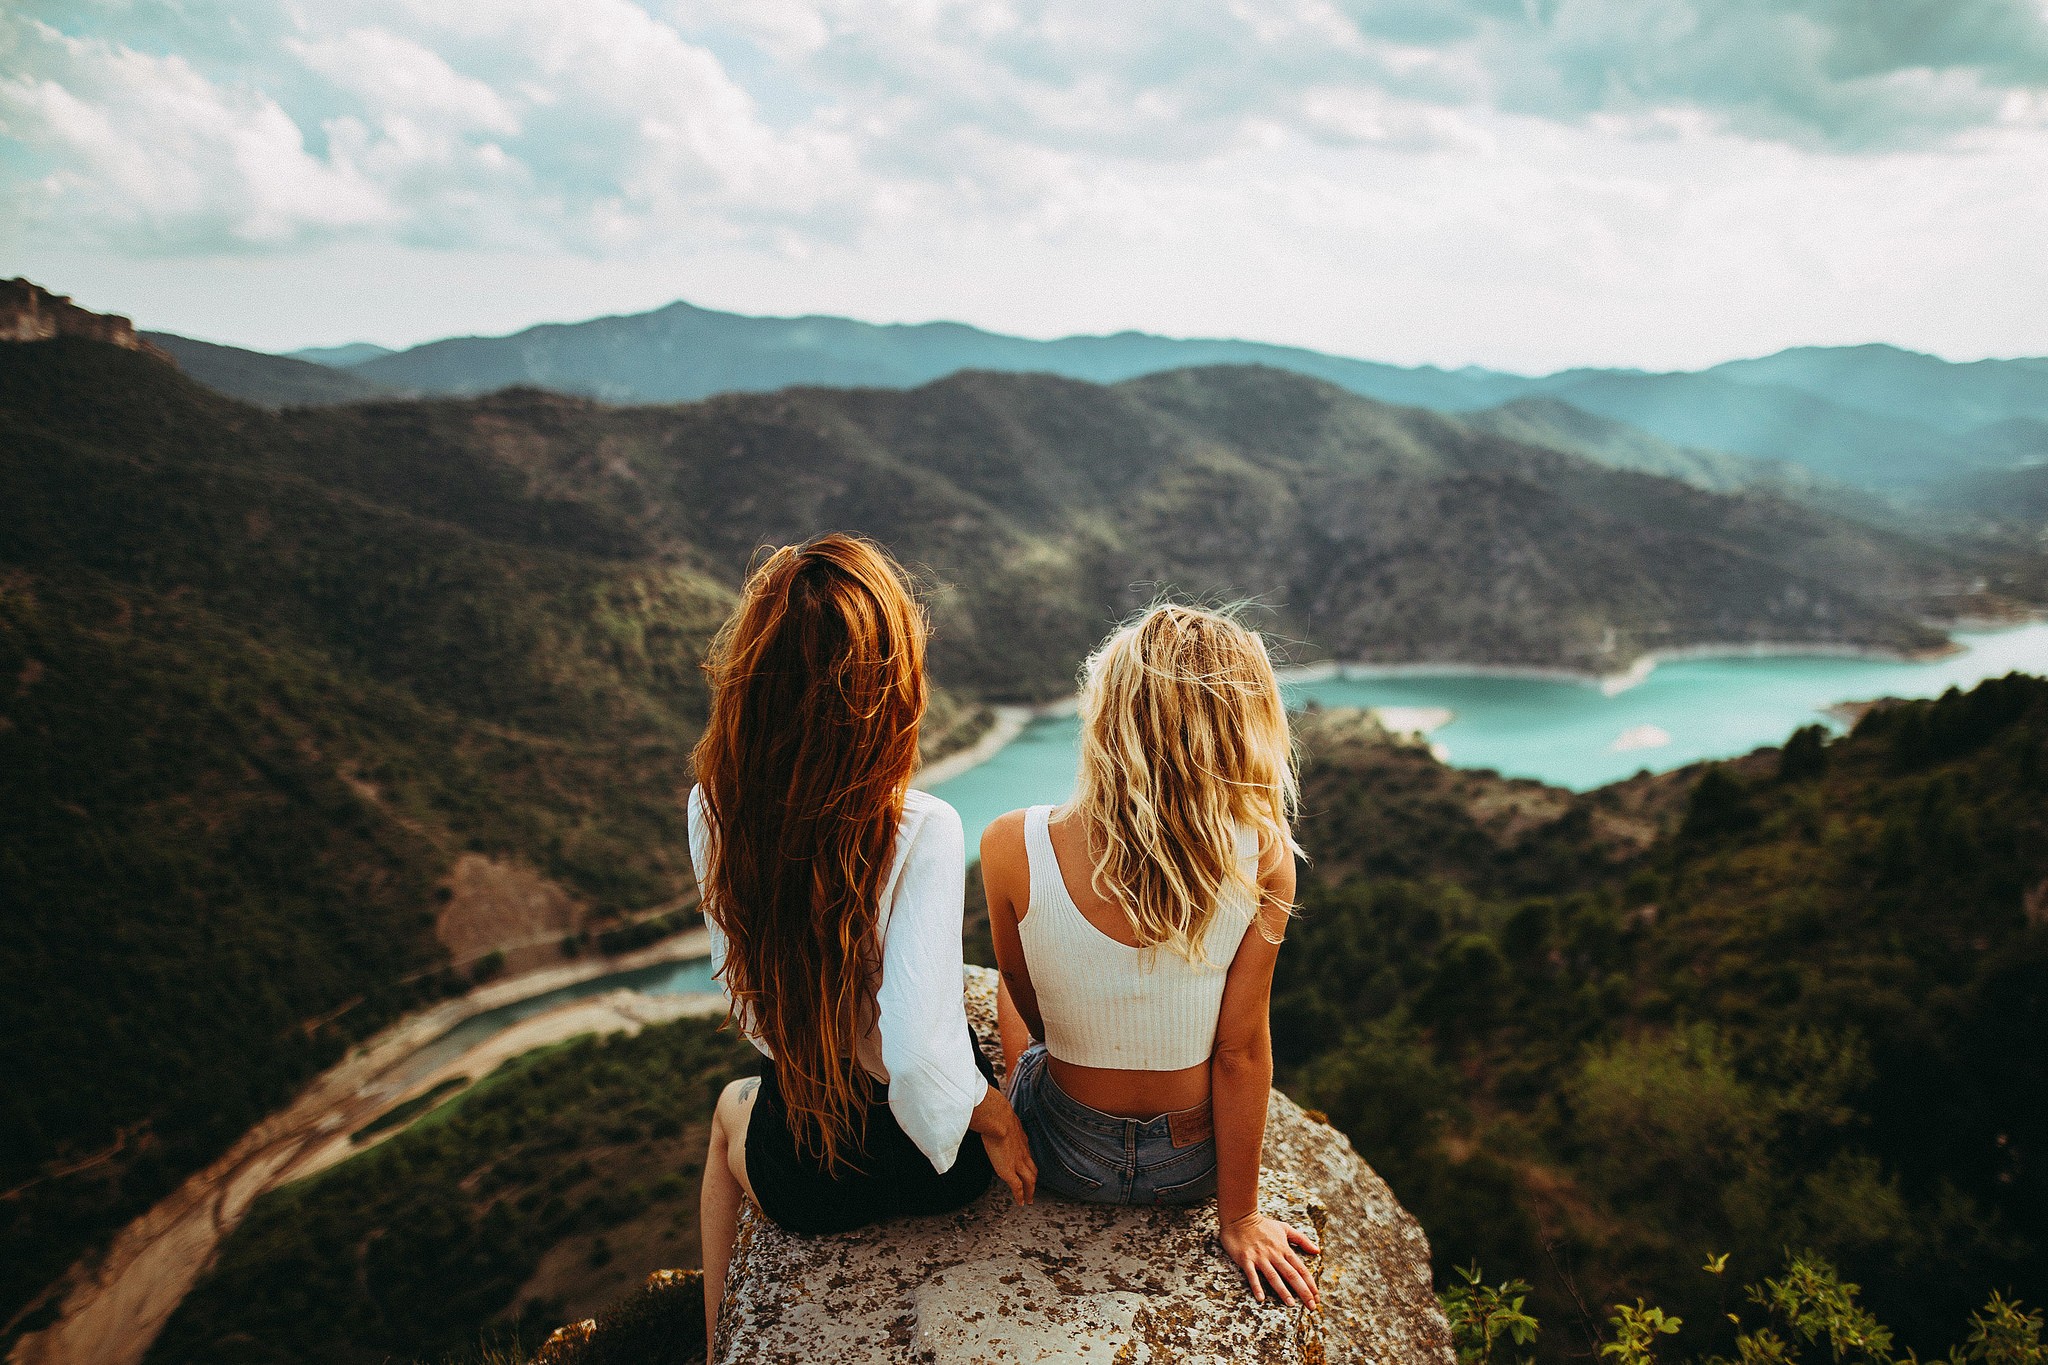 People 2048x1365 women women outdoors long hair sitting redhead blonde tank top jean shorts panorama mountains river depth of field rear view windy two women landscape nature outdoors